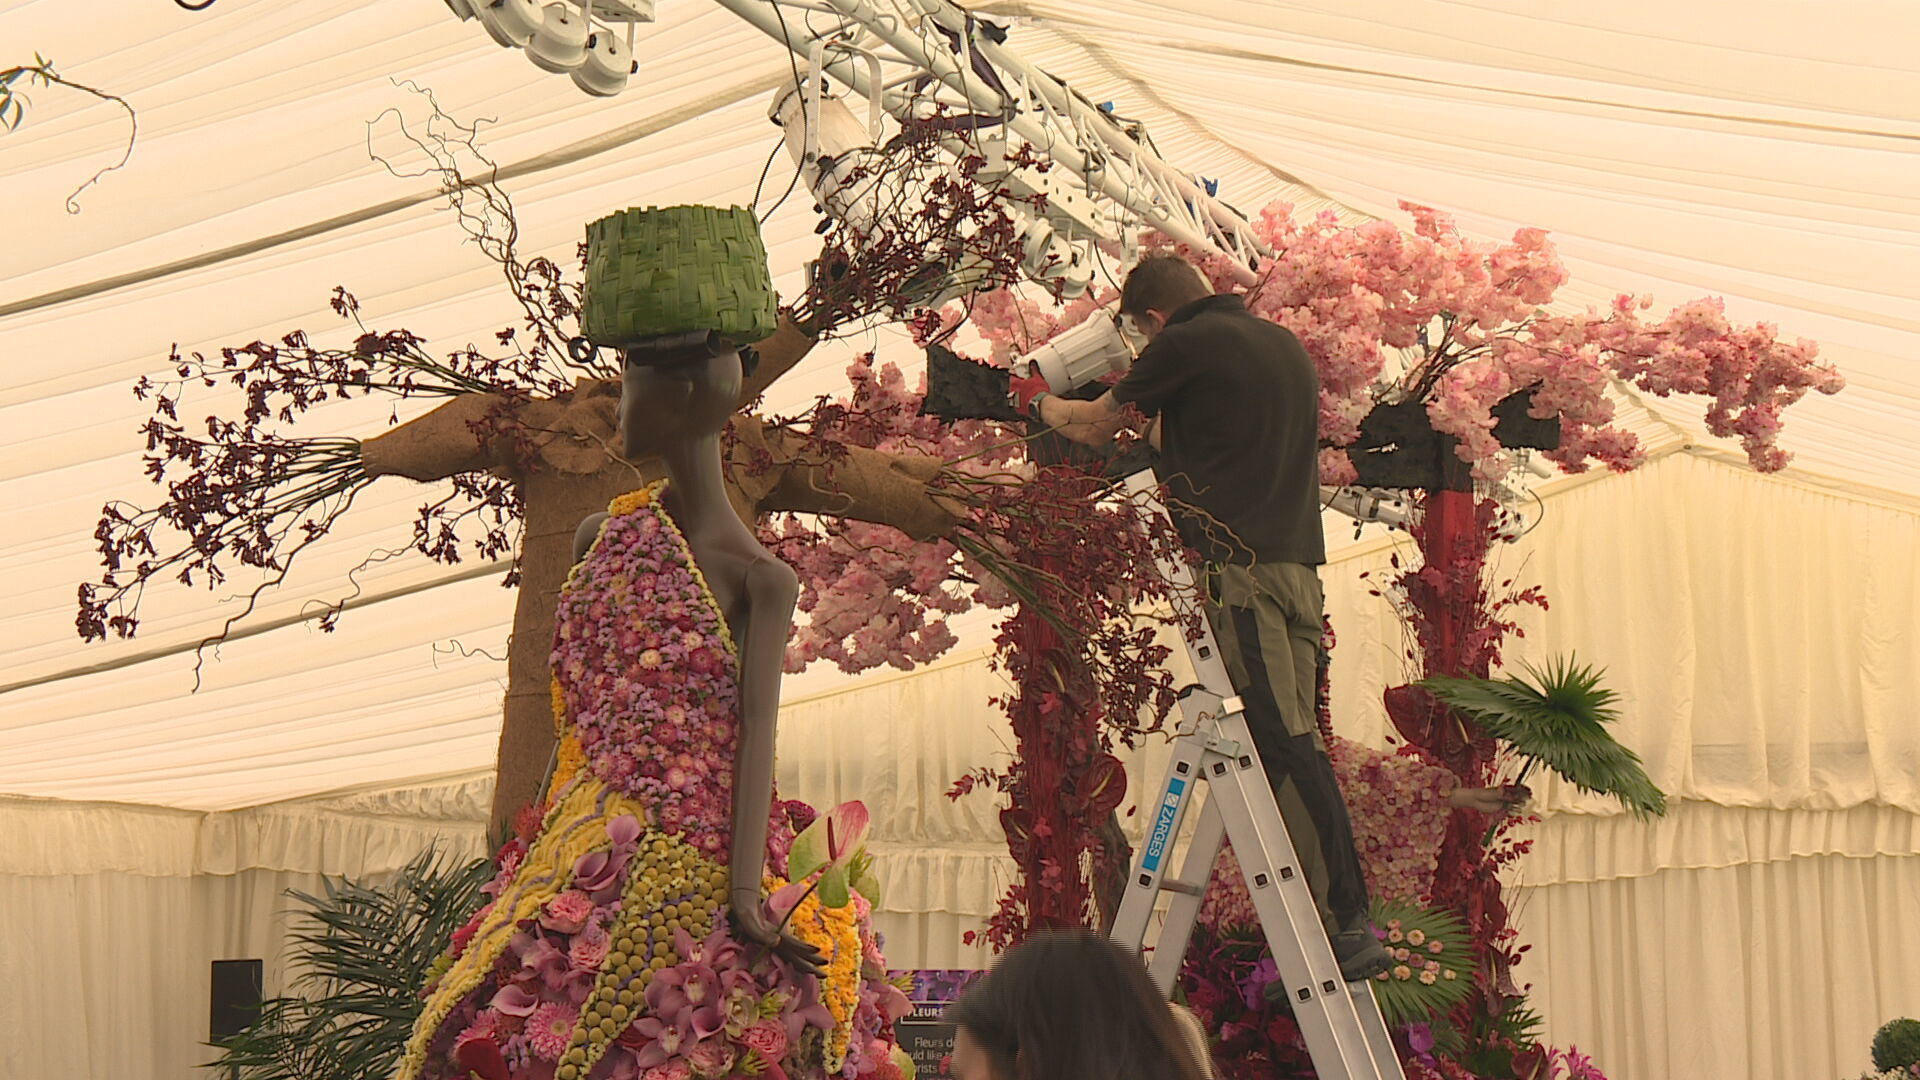 The events aims to put a spotlight on the floral industry. 